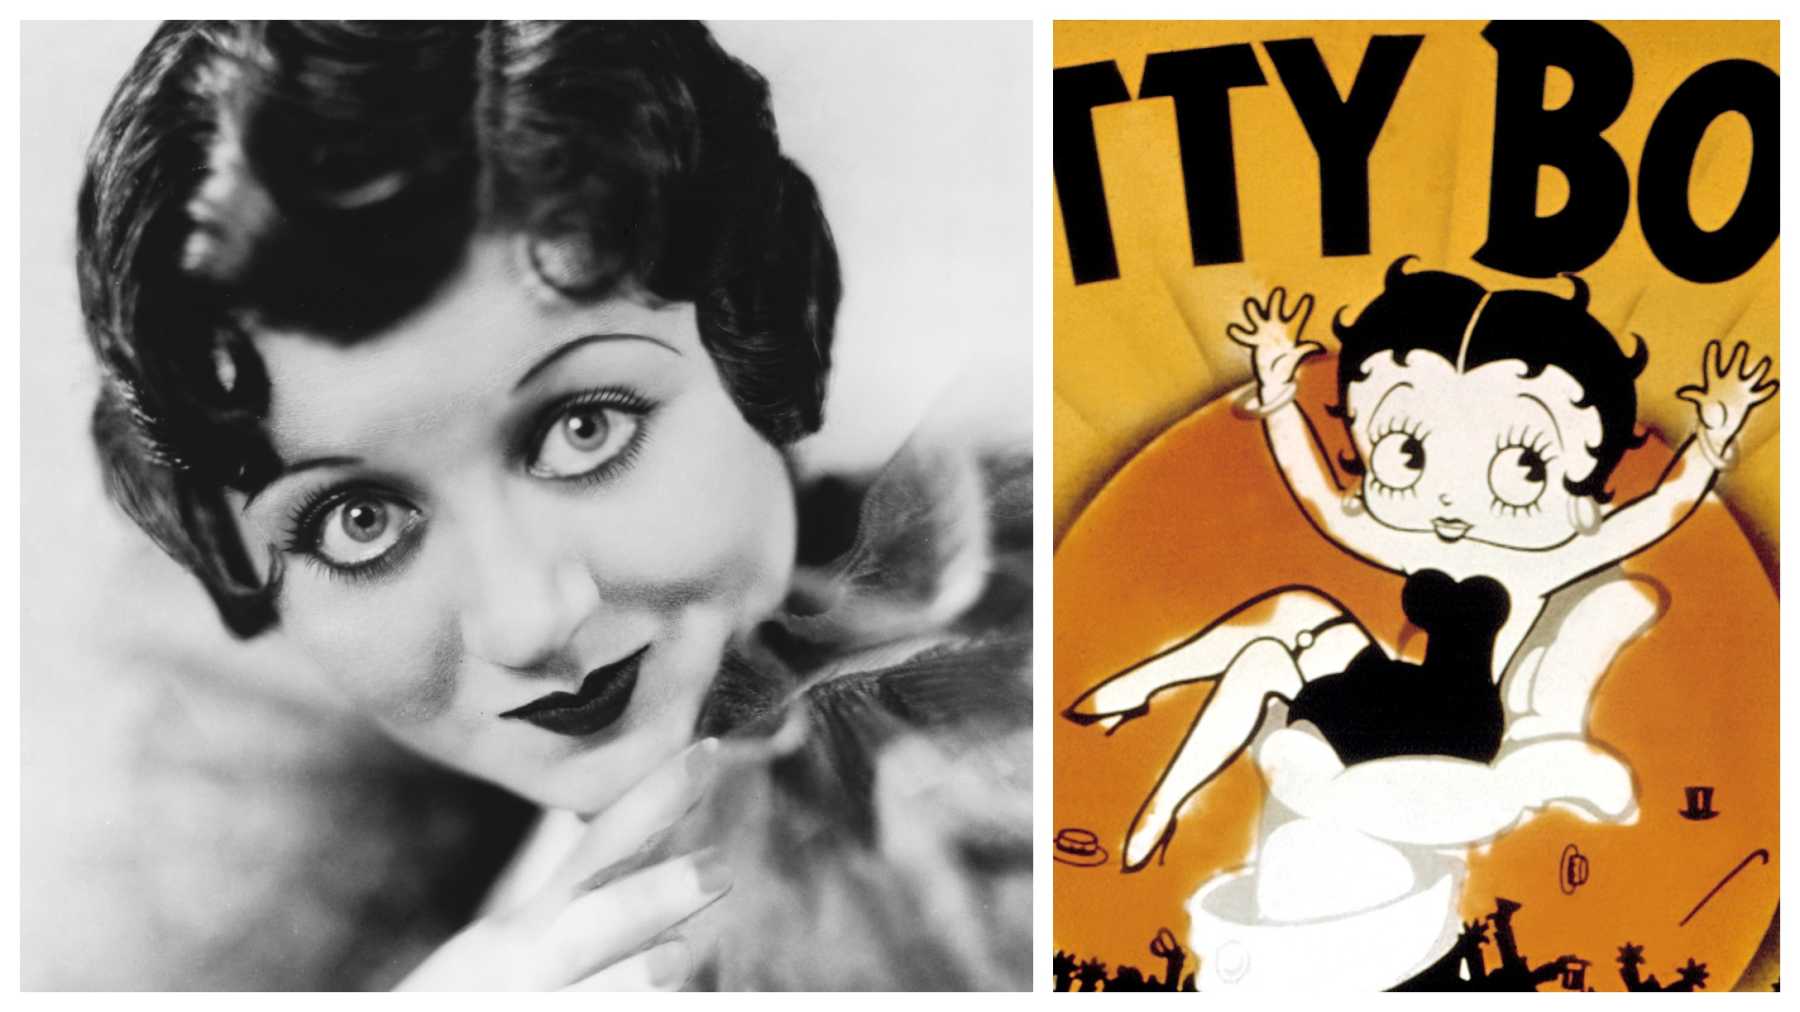 Why is her name Betty Boop?